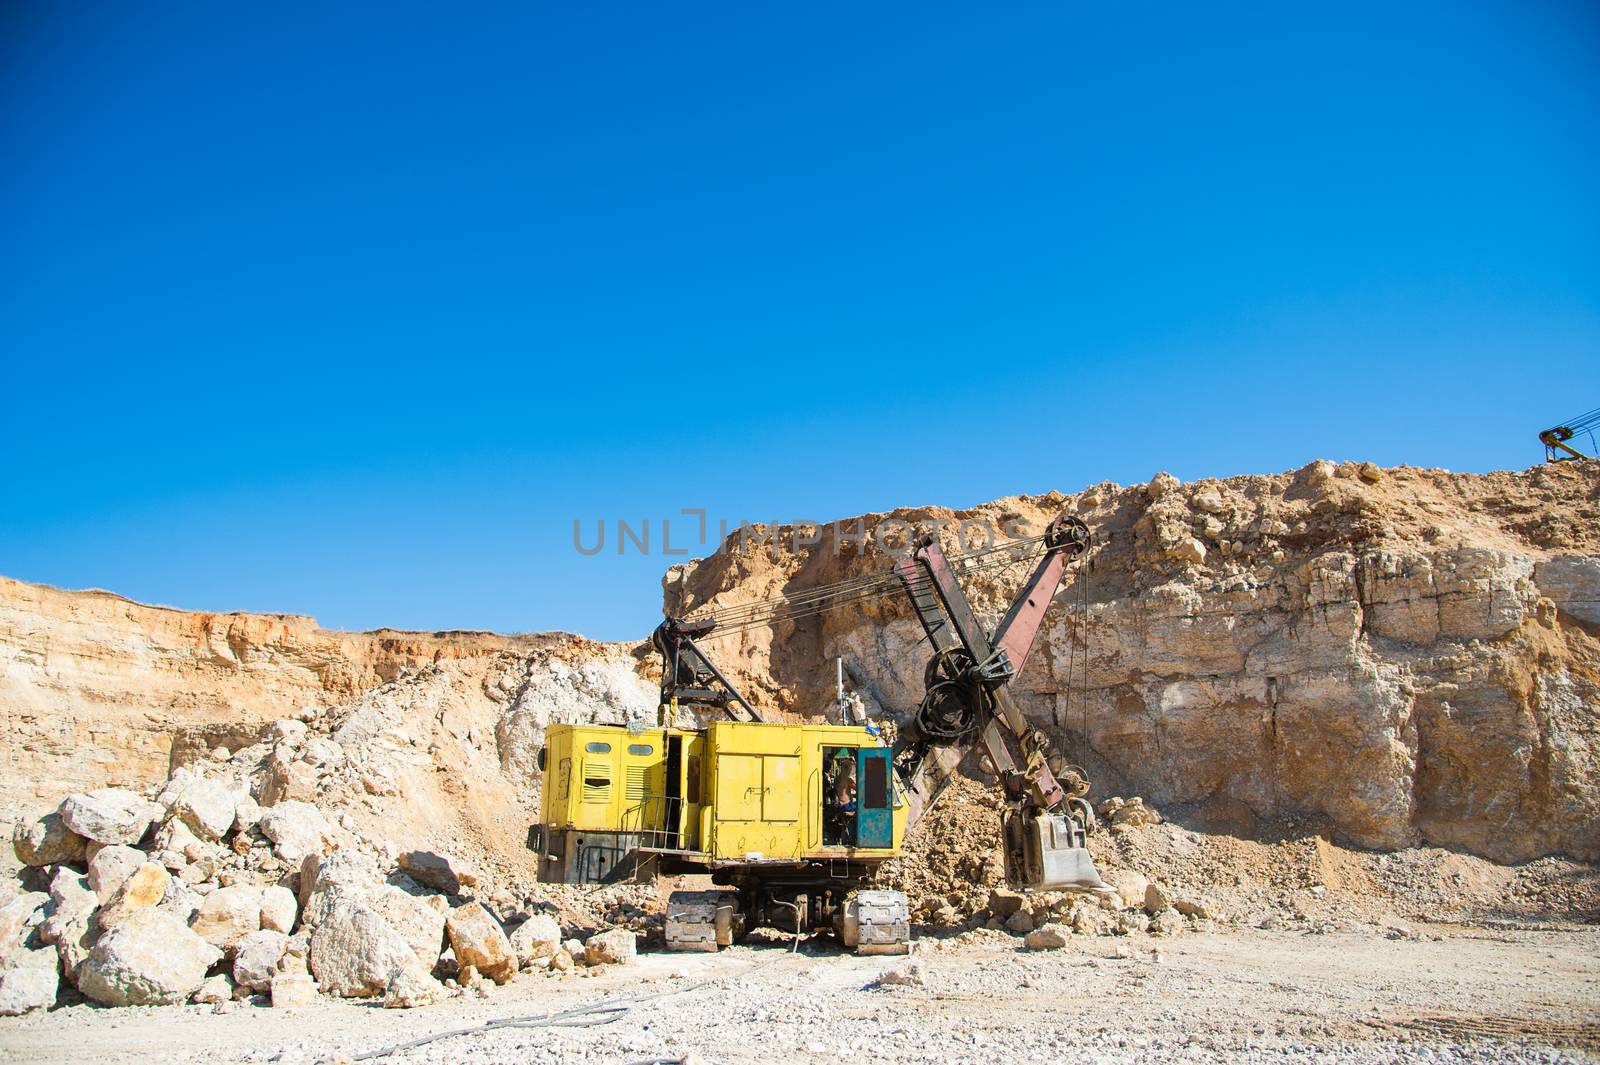 Mining, quarrying, and production of stone at a forsaken quarry